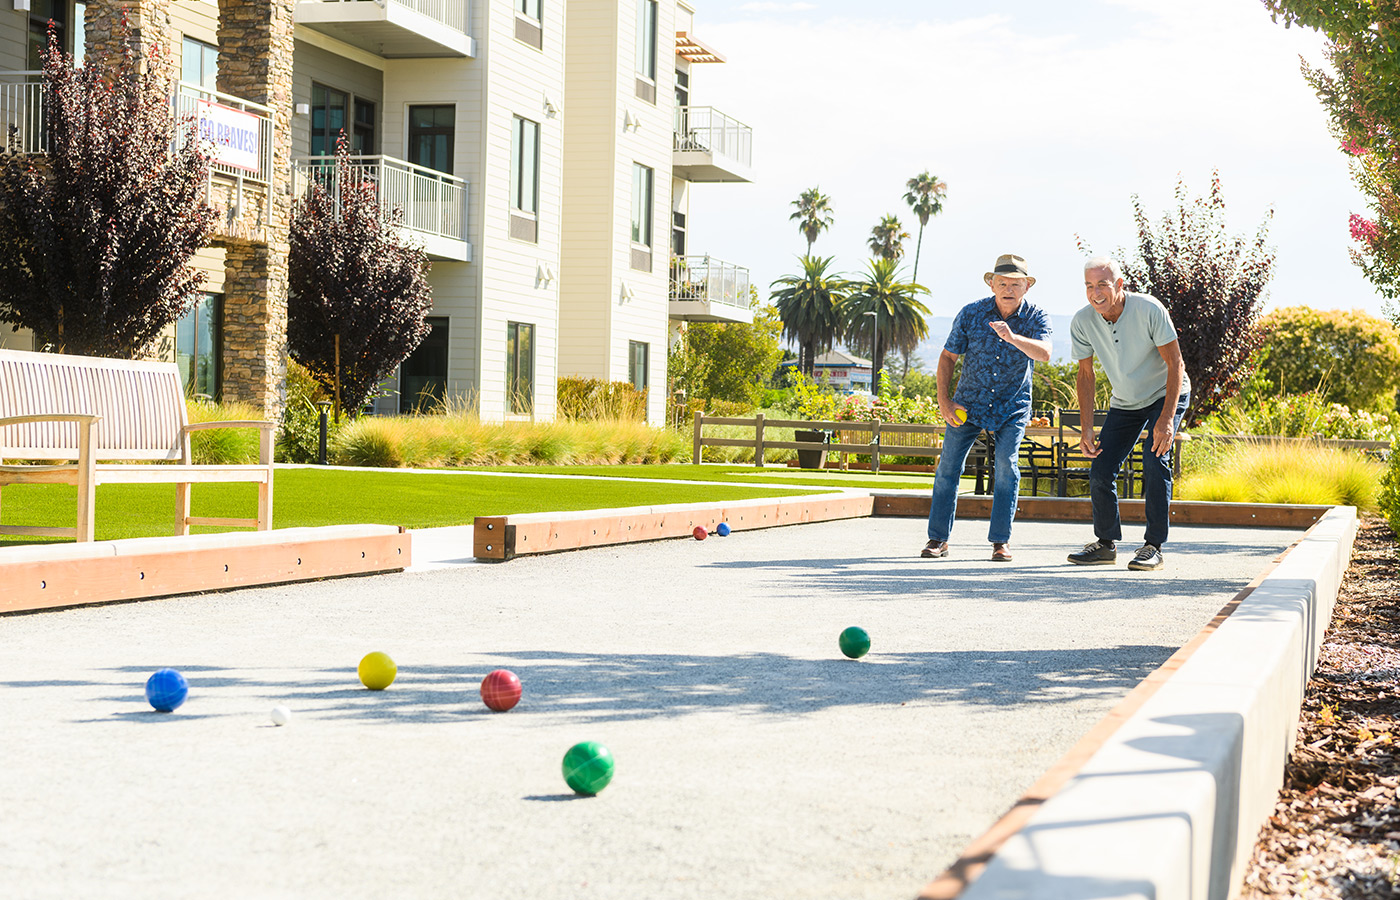 Residents are playing bocce ball.